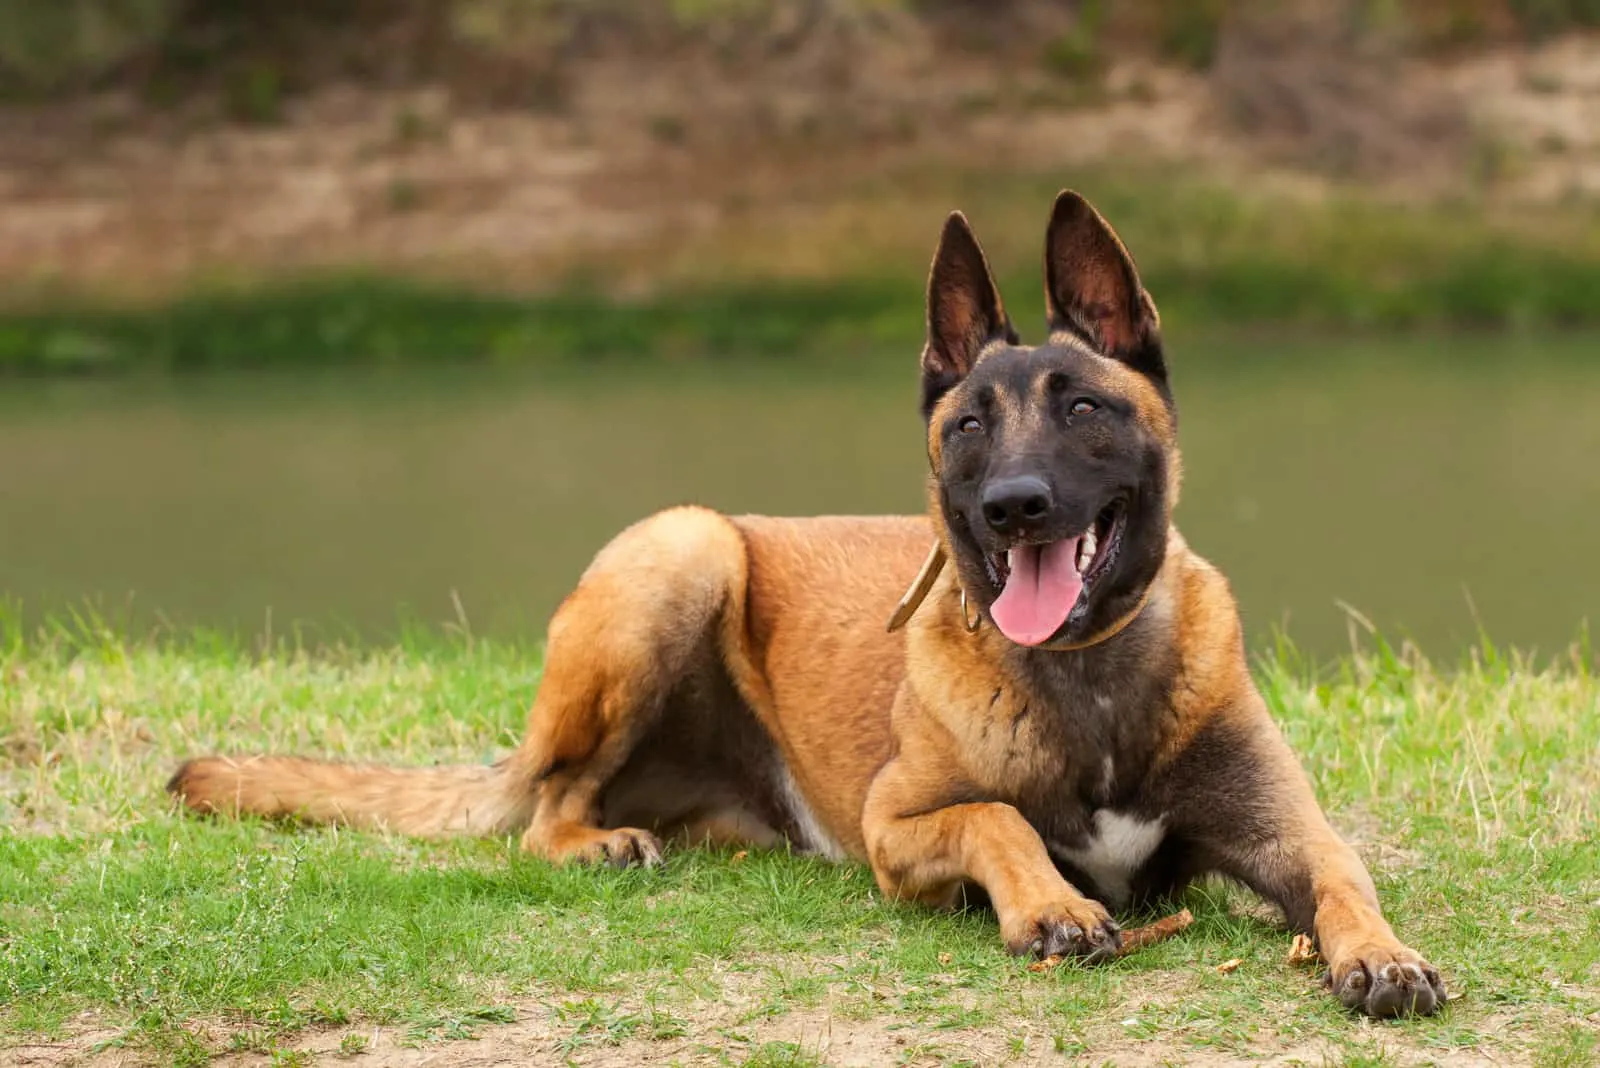 Belgian Malinois young dog in the park field